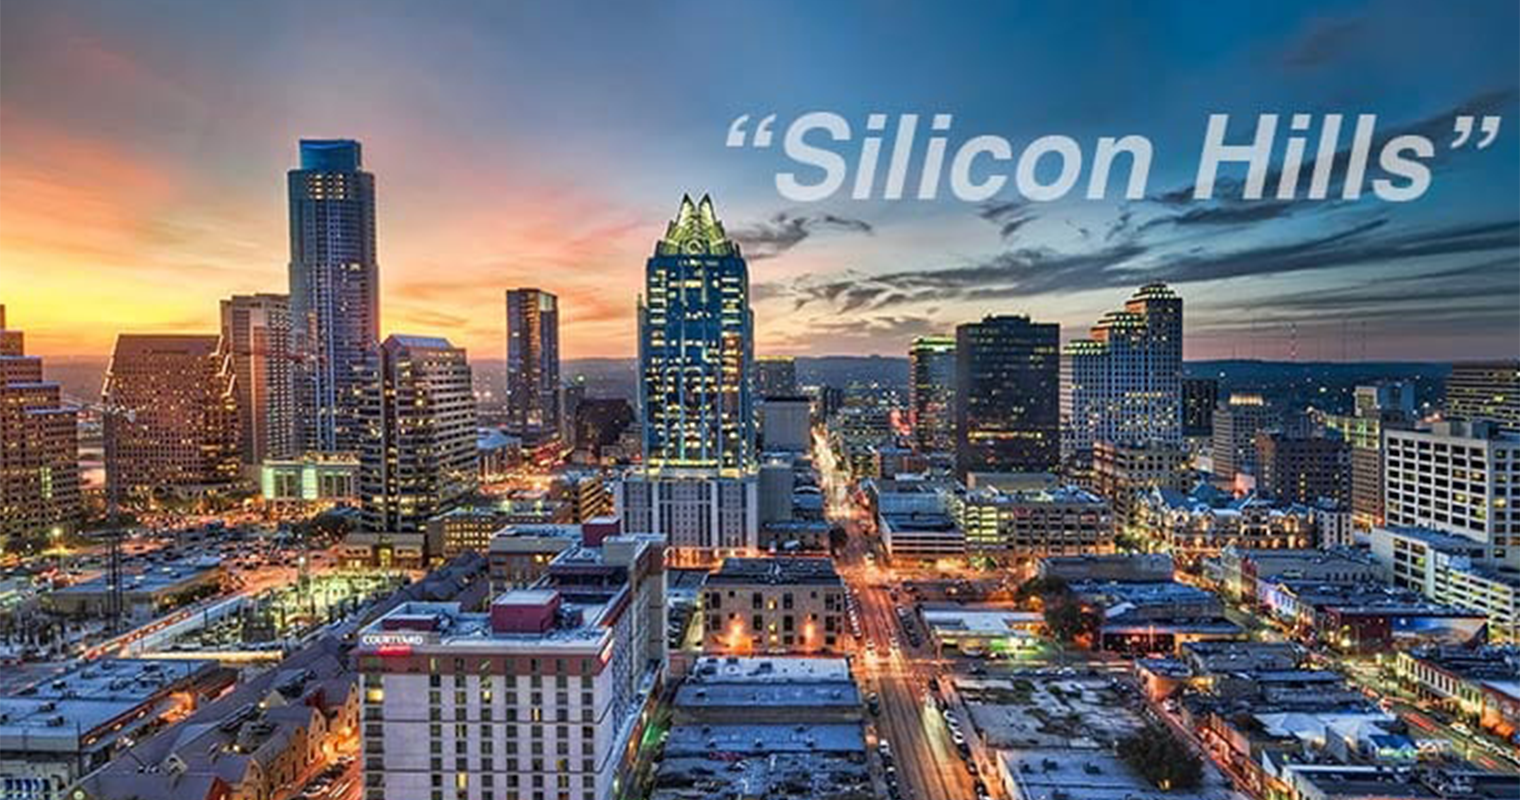 Can Austin’s silicon hills overwhelm the infamous Silicon Valley?